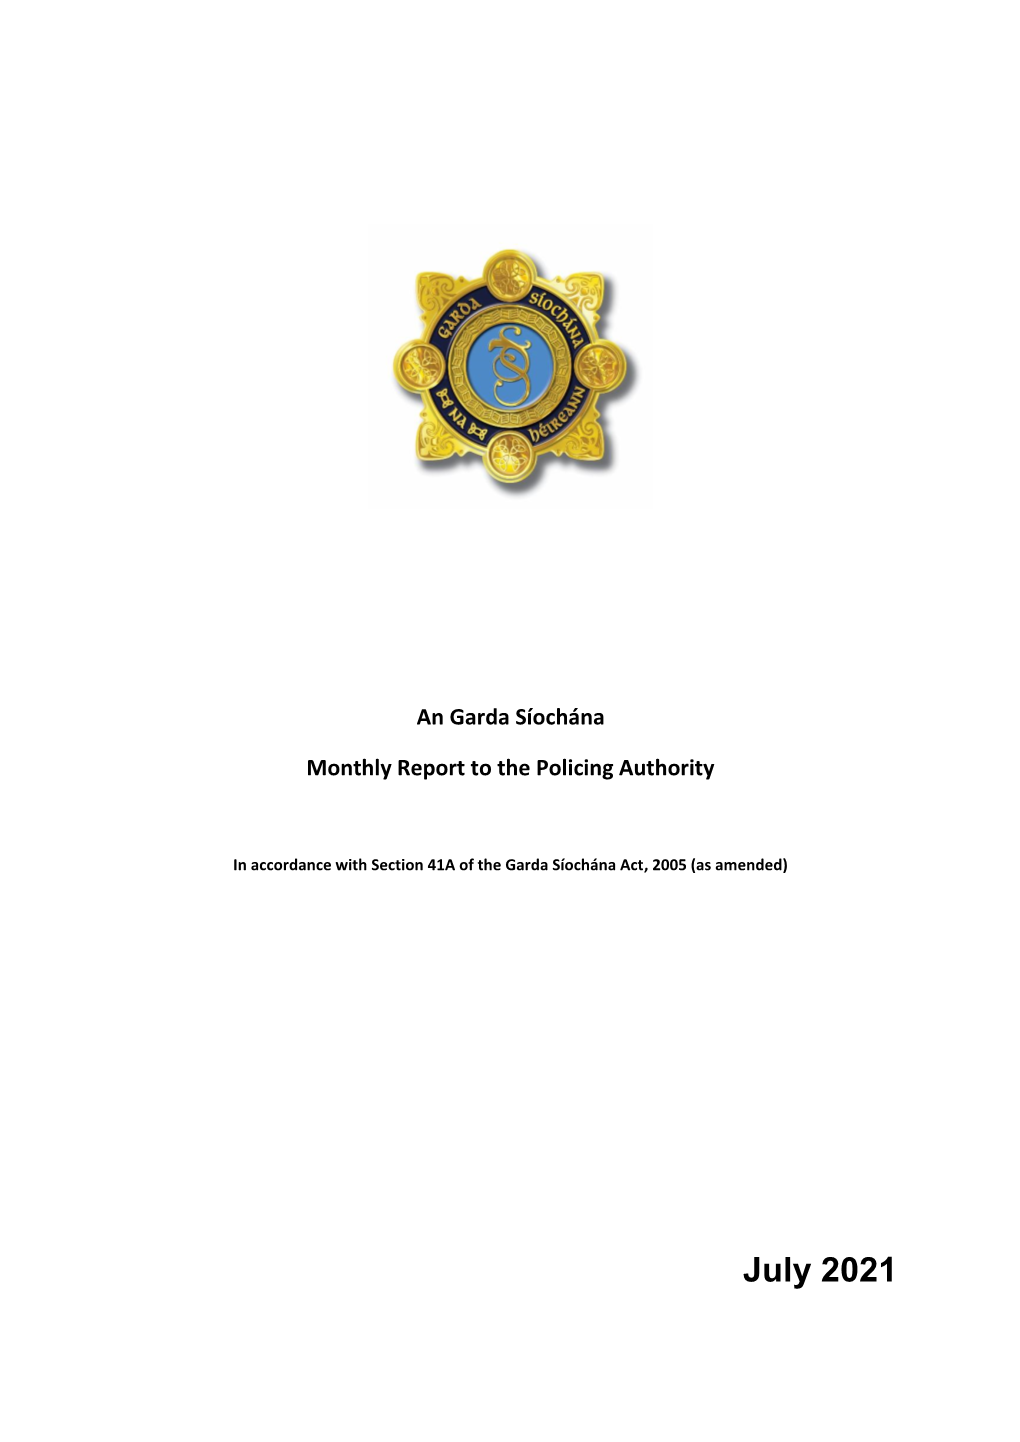 Garda Commissioners Monthly Report to the Policing Authority July 2021